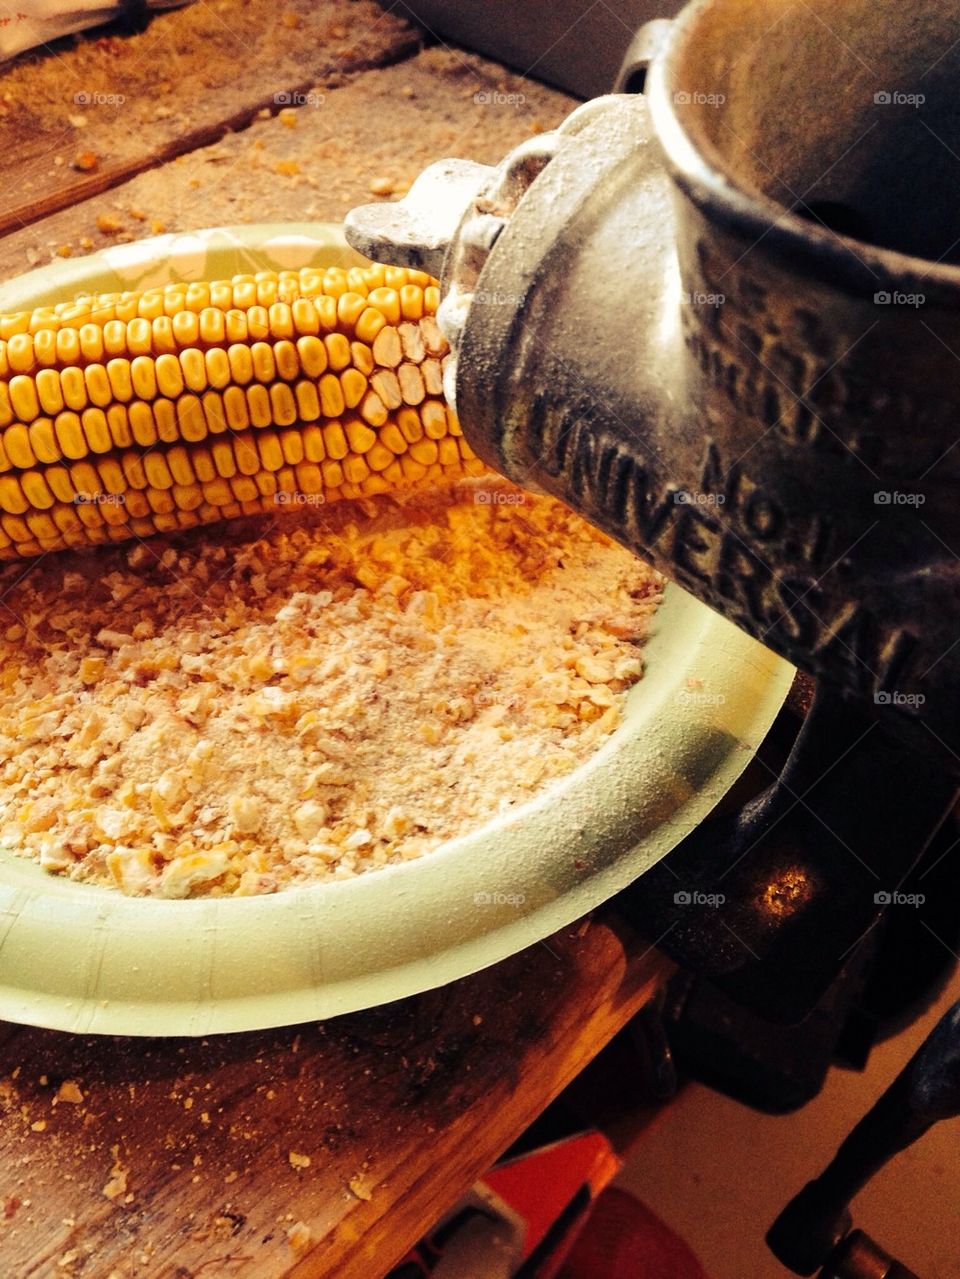 Grind the corn.